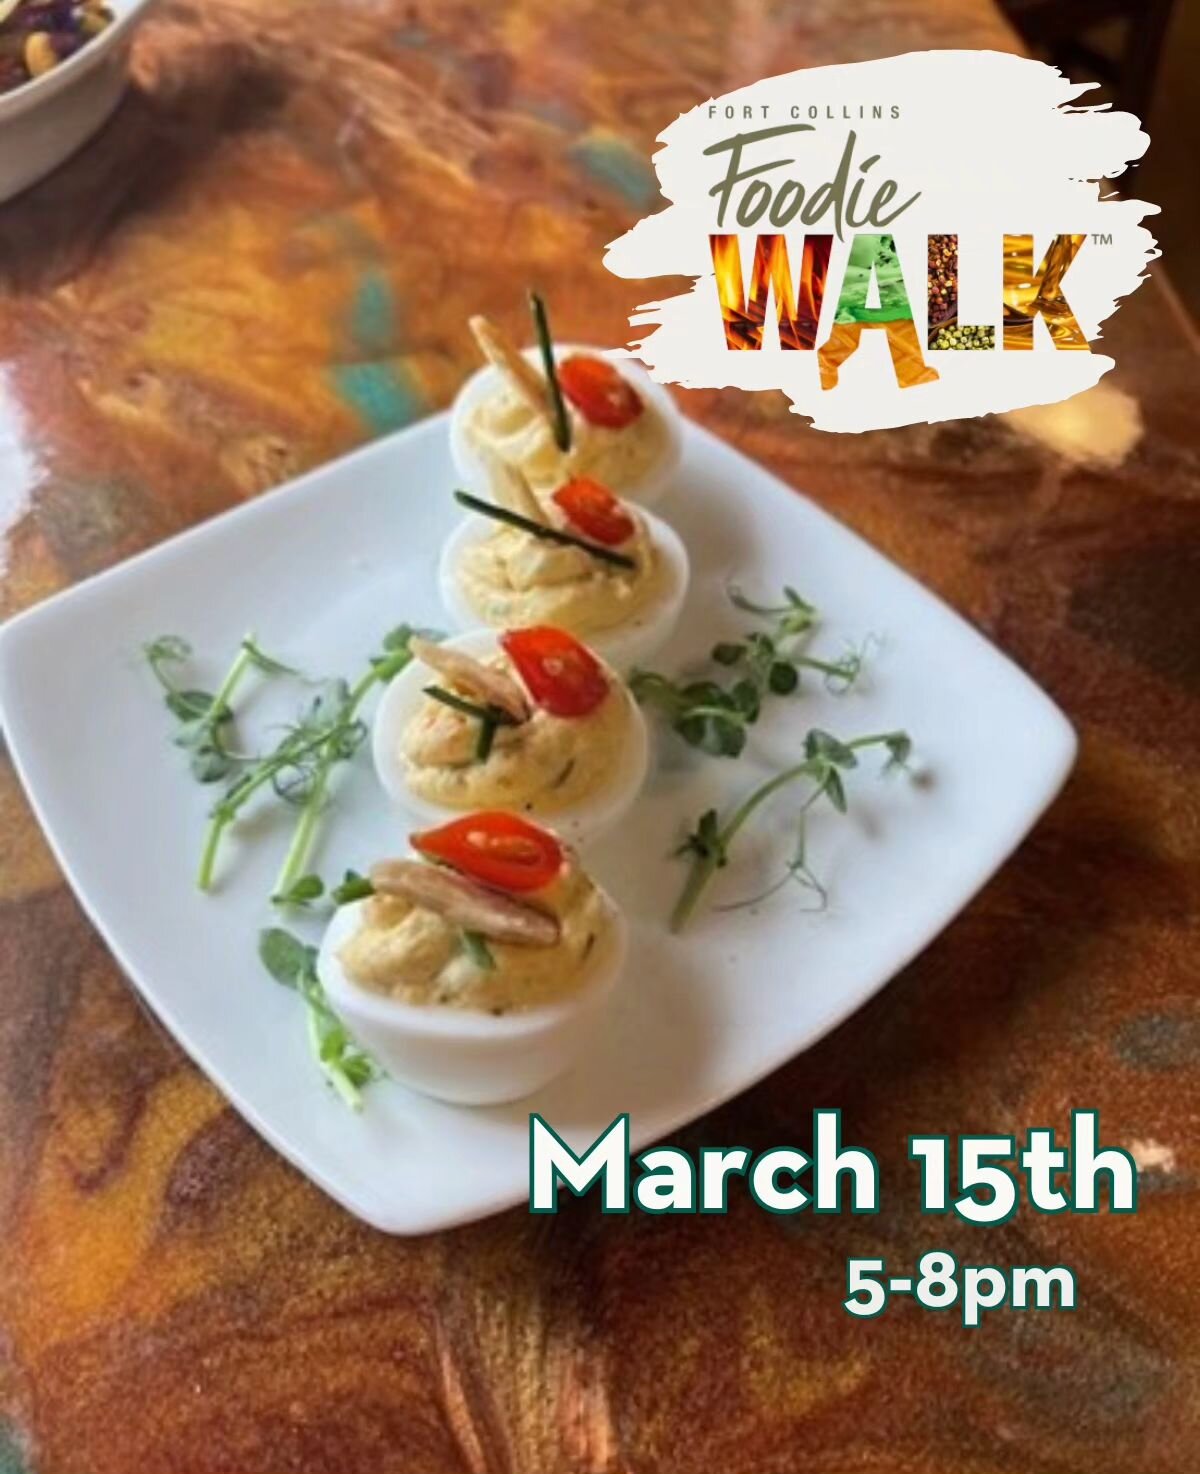 Who's ready for the Foodie Walk? 

We have a NEW delicious Deviled Egg recipe worth trying! Stop by from 5-8pm on Friday for these savory snacks! 🤗

#noco #foco #foodie #foodiewalk #downtownfortcollins #supportlocal #localsnacks #localspirits #disti